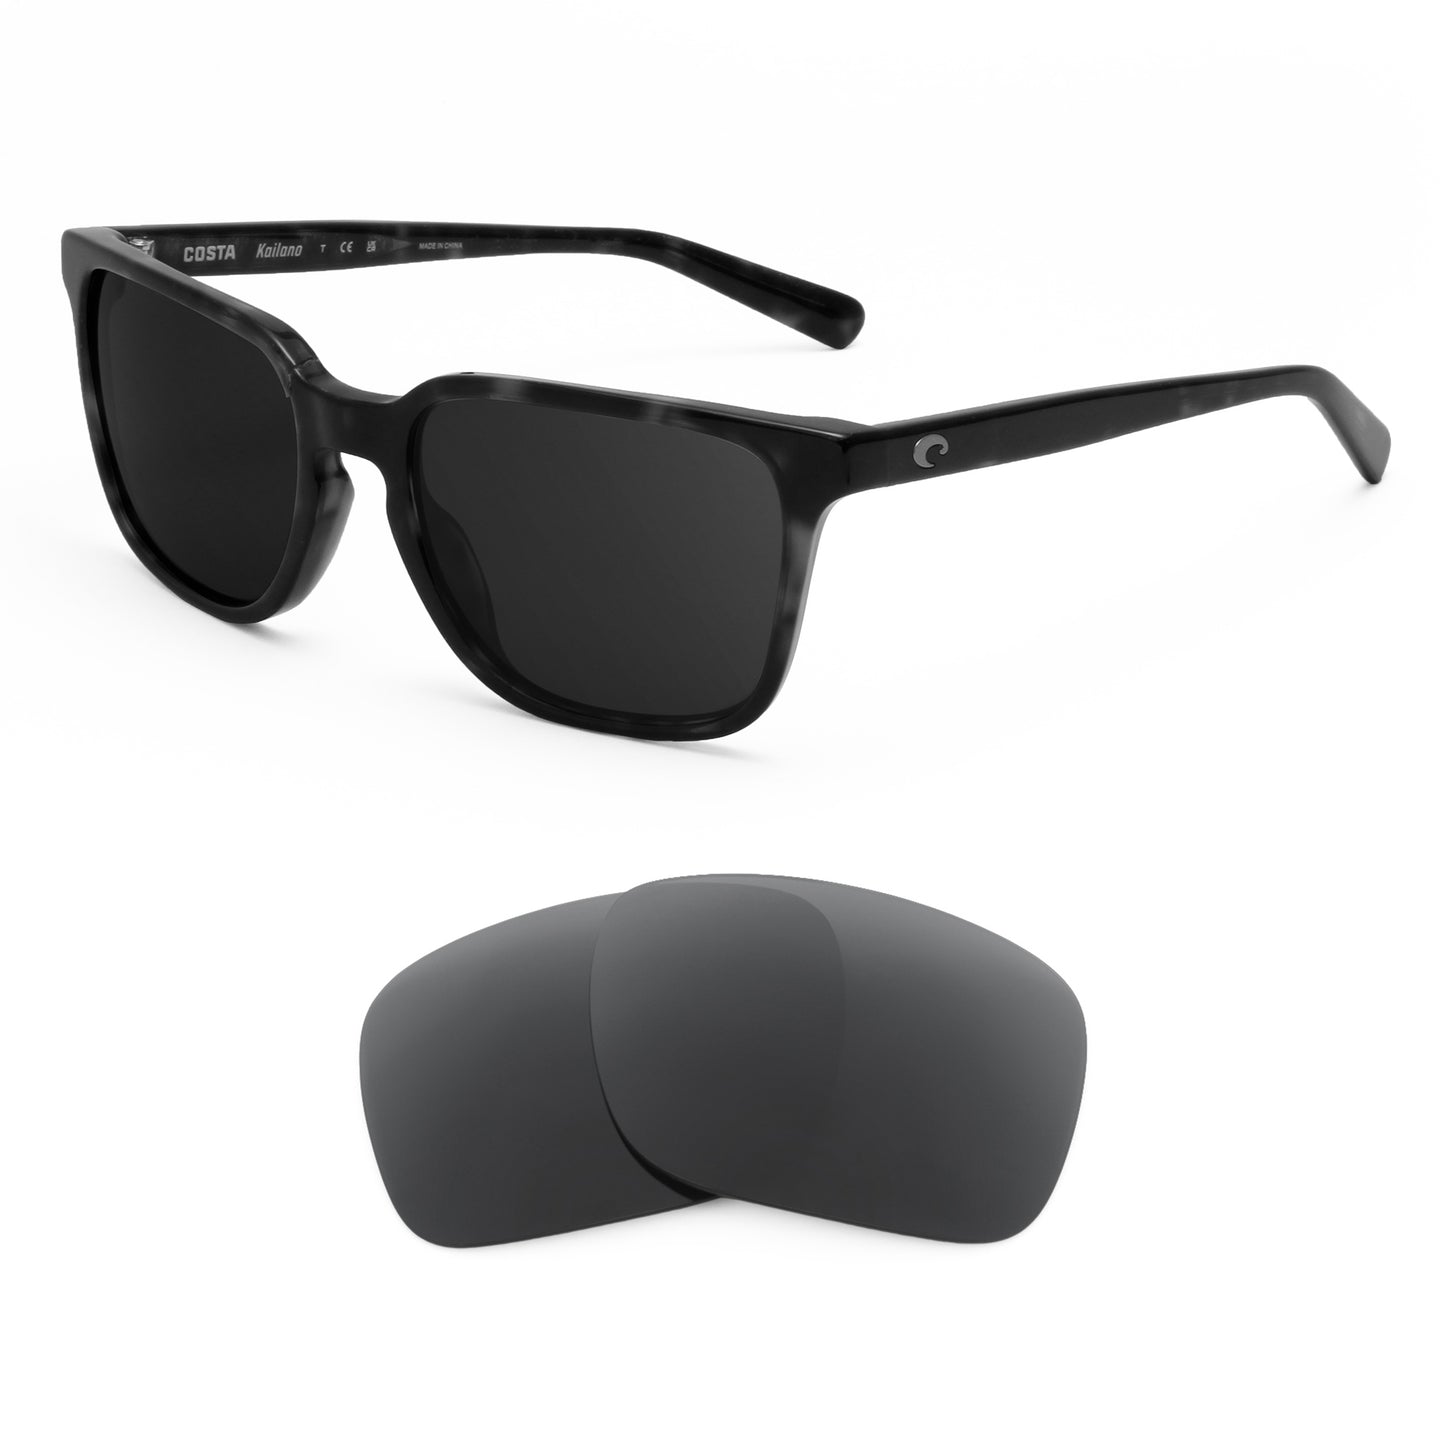 Costa Kailano sunglasses with replacement lenses